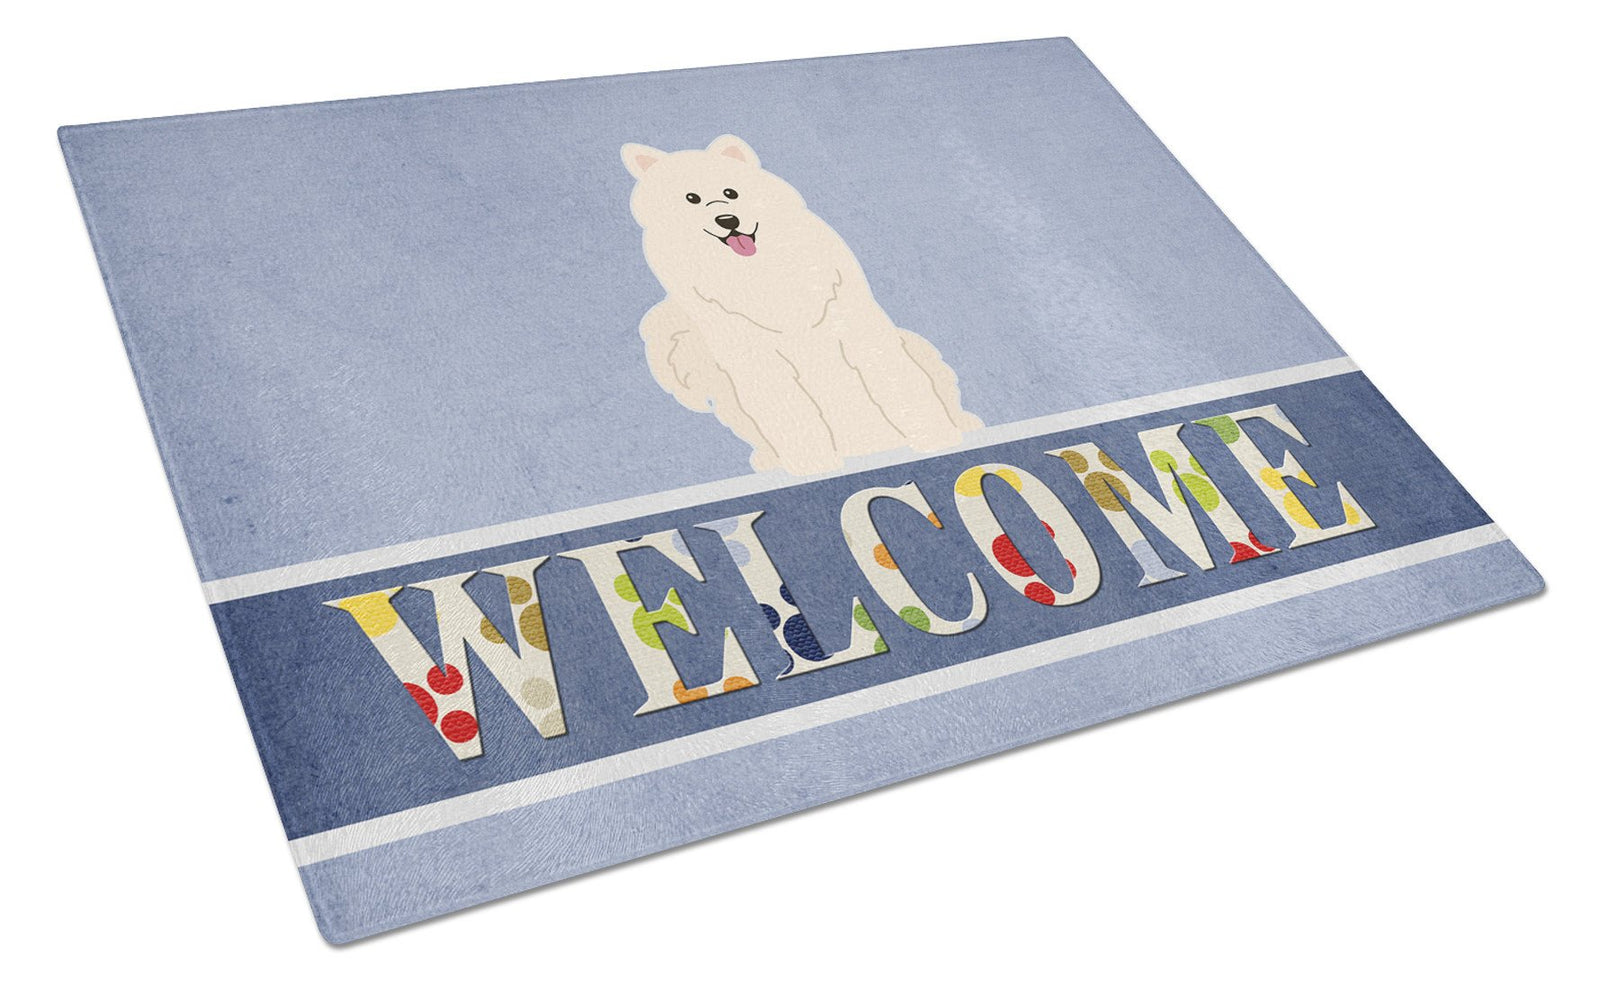 Samoyed Welcome Glass Cutting Board Large BB5611LCB by Caroline's Treasures